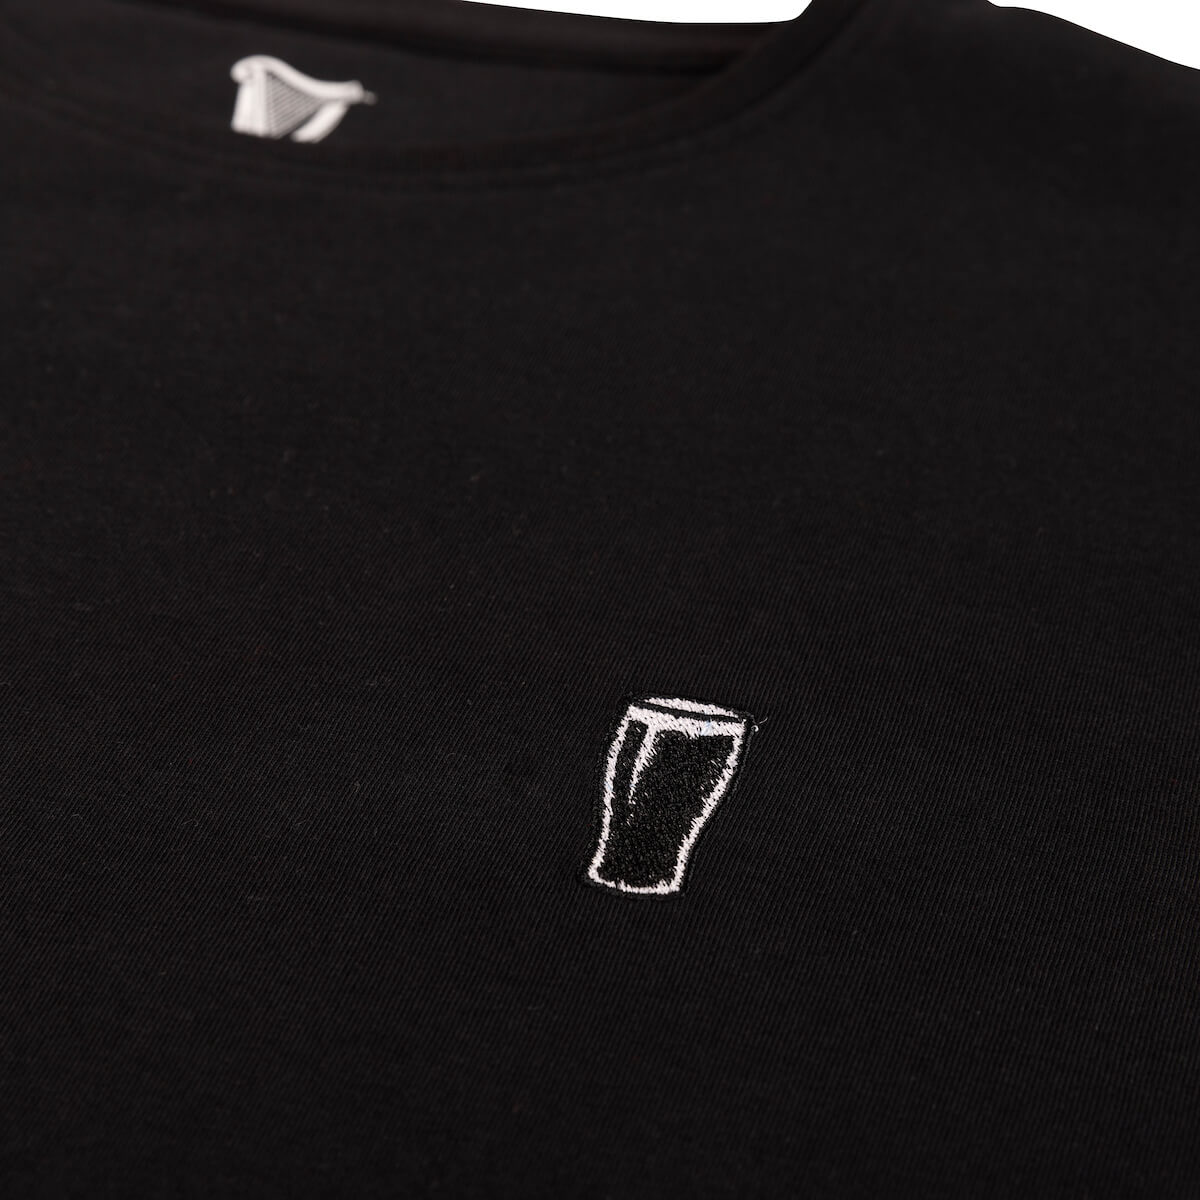 Guinness Storehouse Exclusive Better Cotton Initiative Black T-Shirt With Iconic Pint